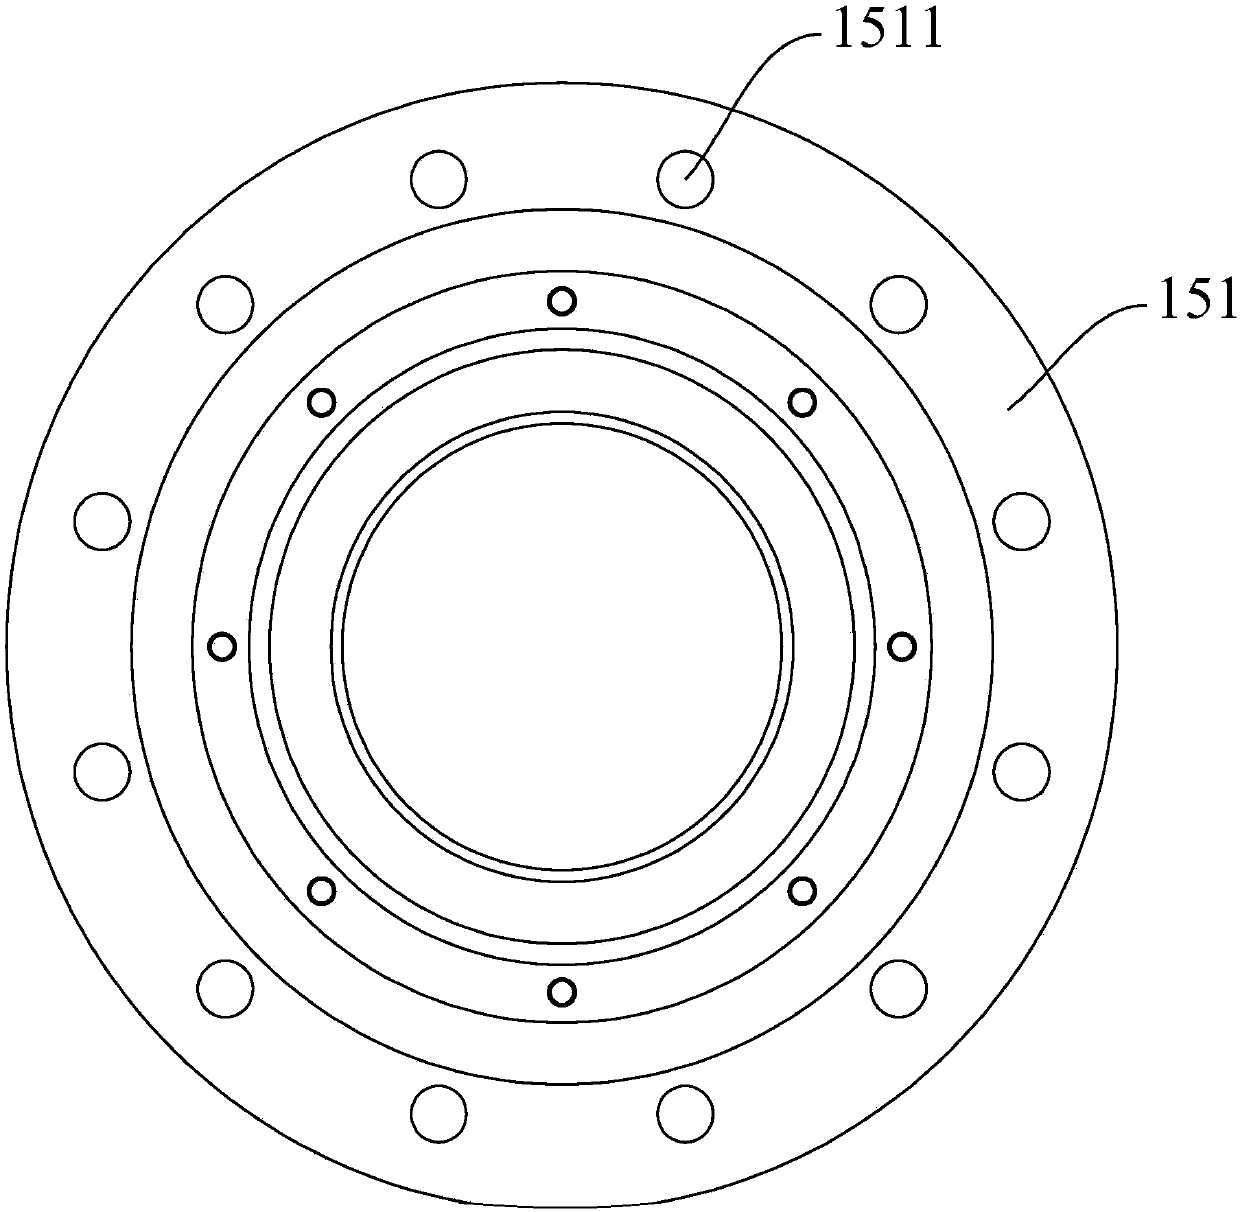 Running gear structure and gear vehicle wheel set